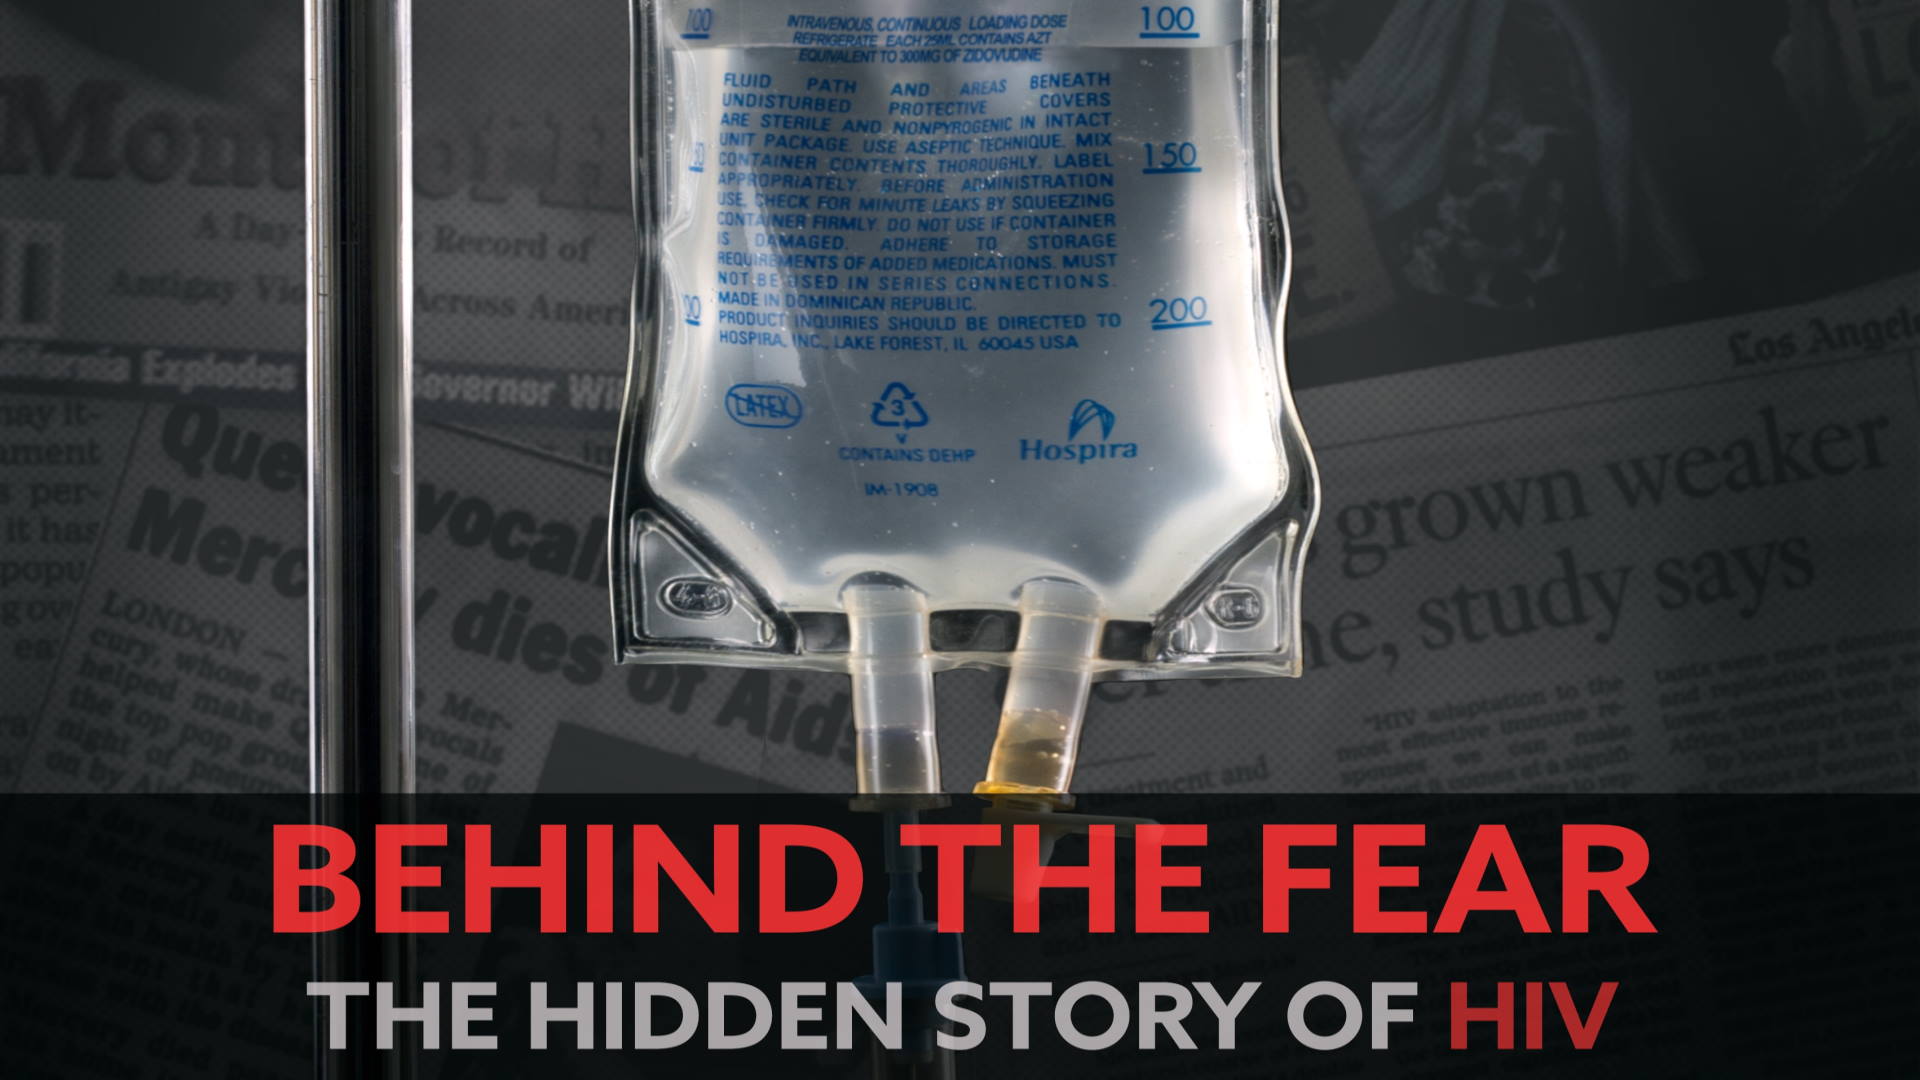 Behind The Fear: The Hidden Story of HIV